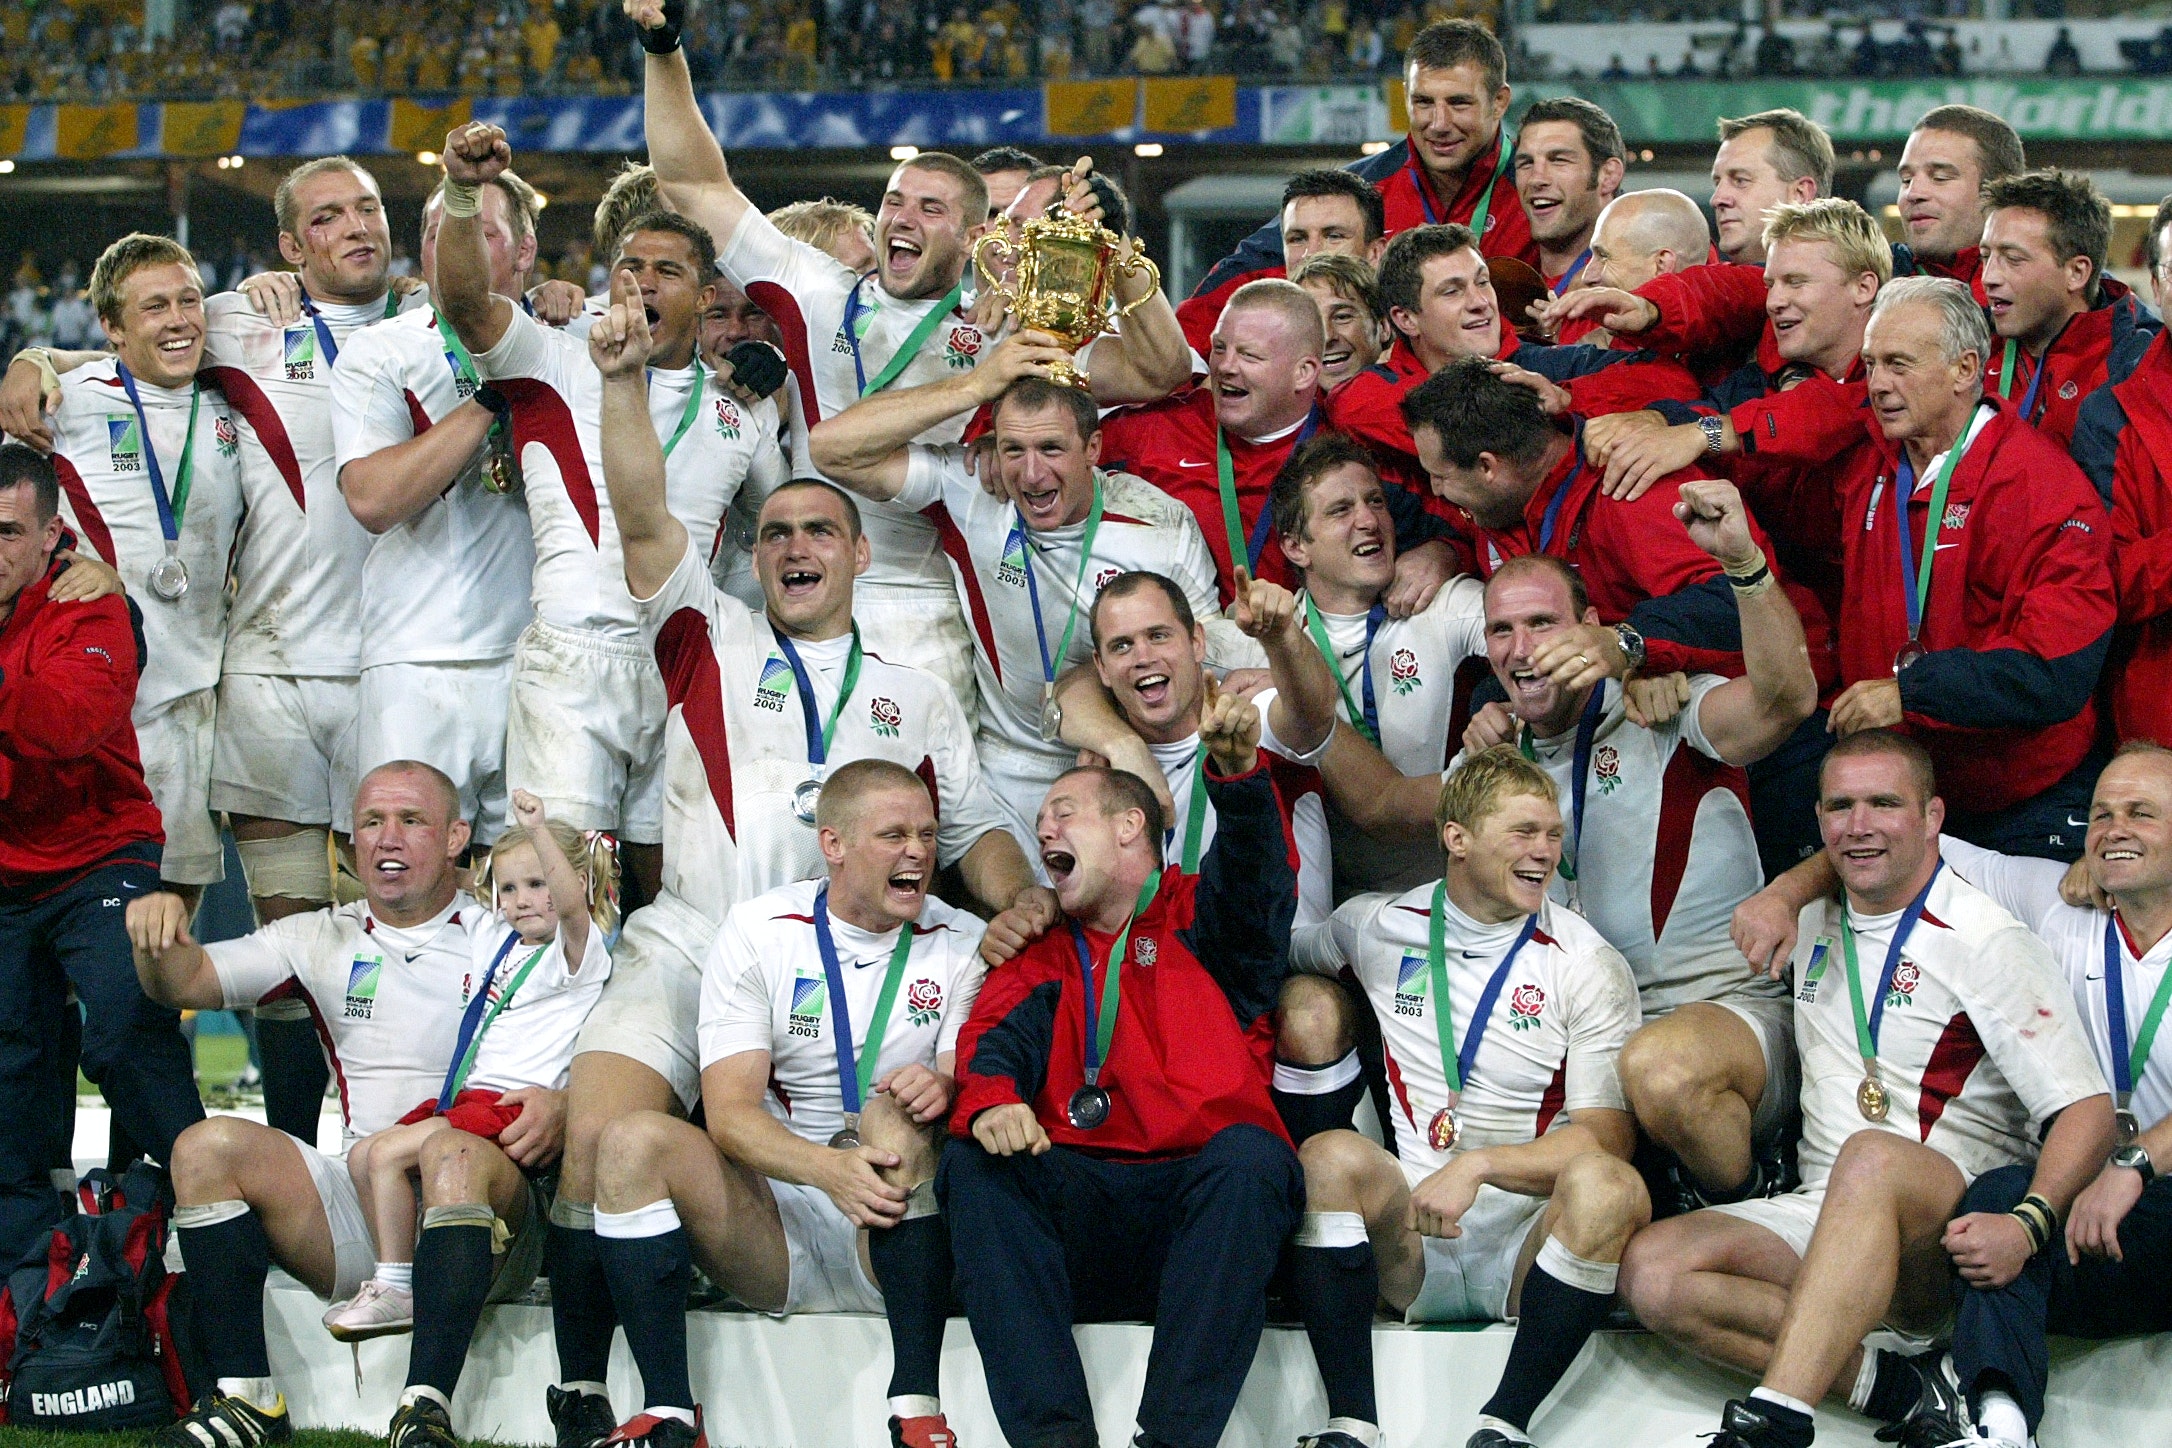 England Rugby Union World Cup winners 2003 souvenir print 